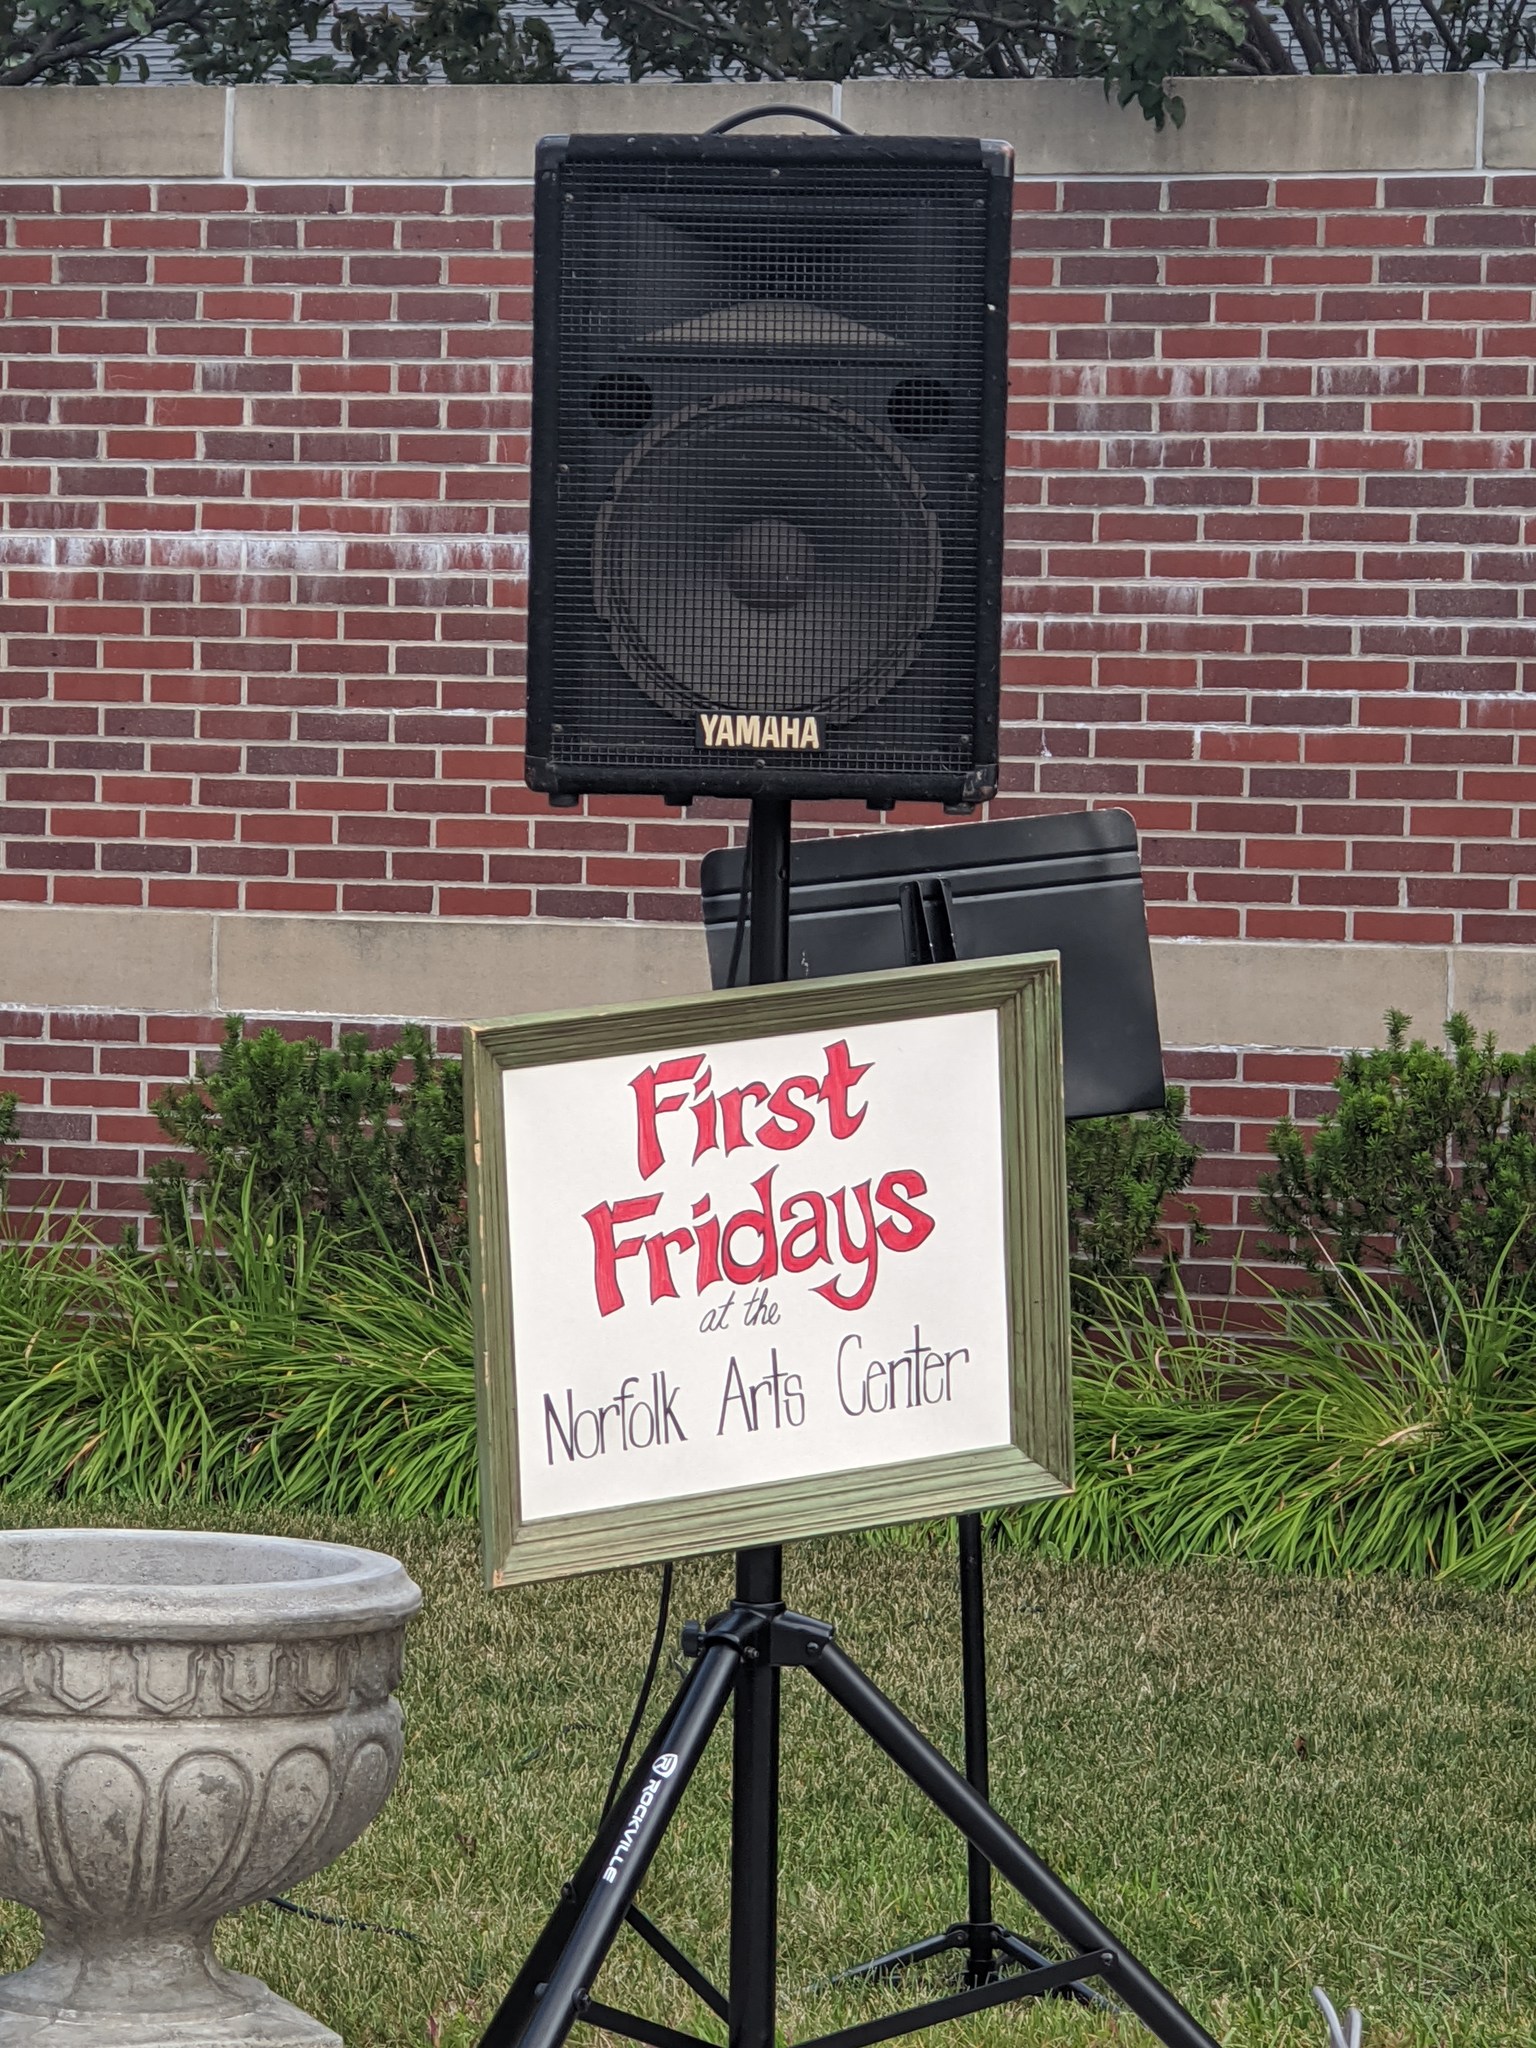 First Fridays at the Norfolk Arts Center